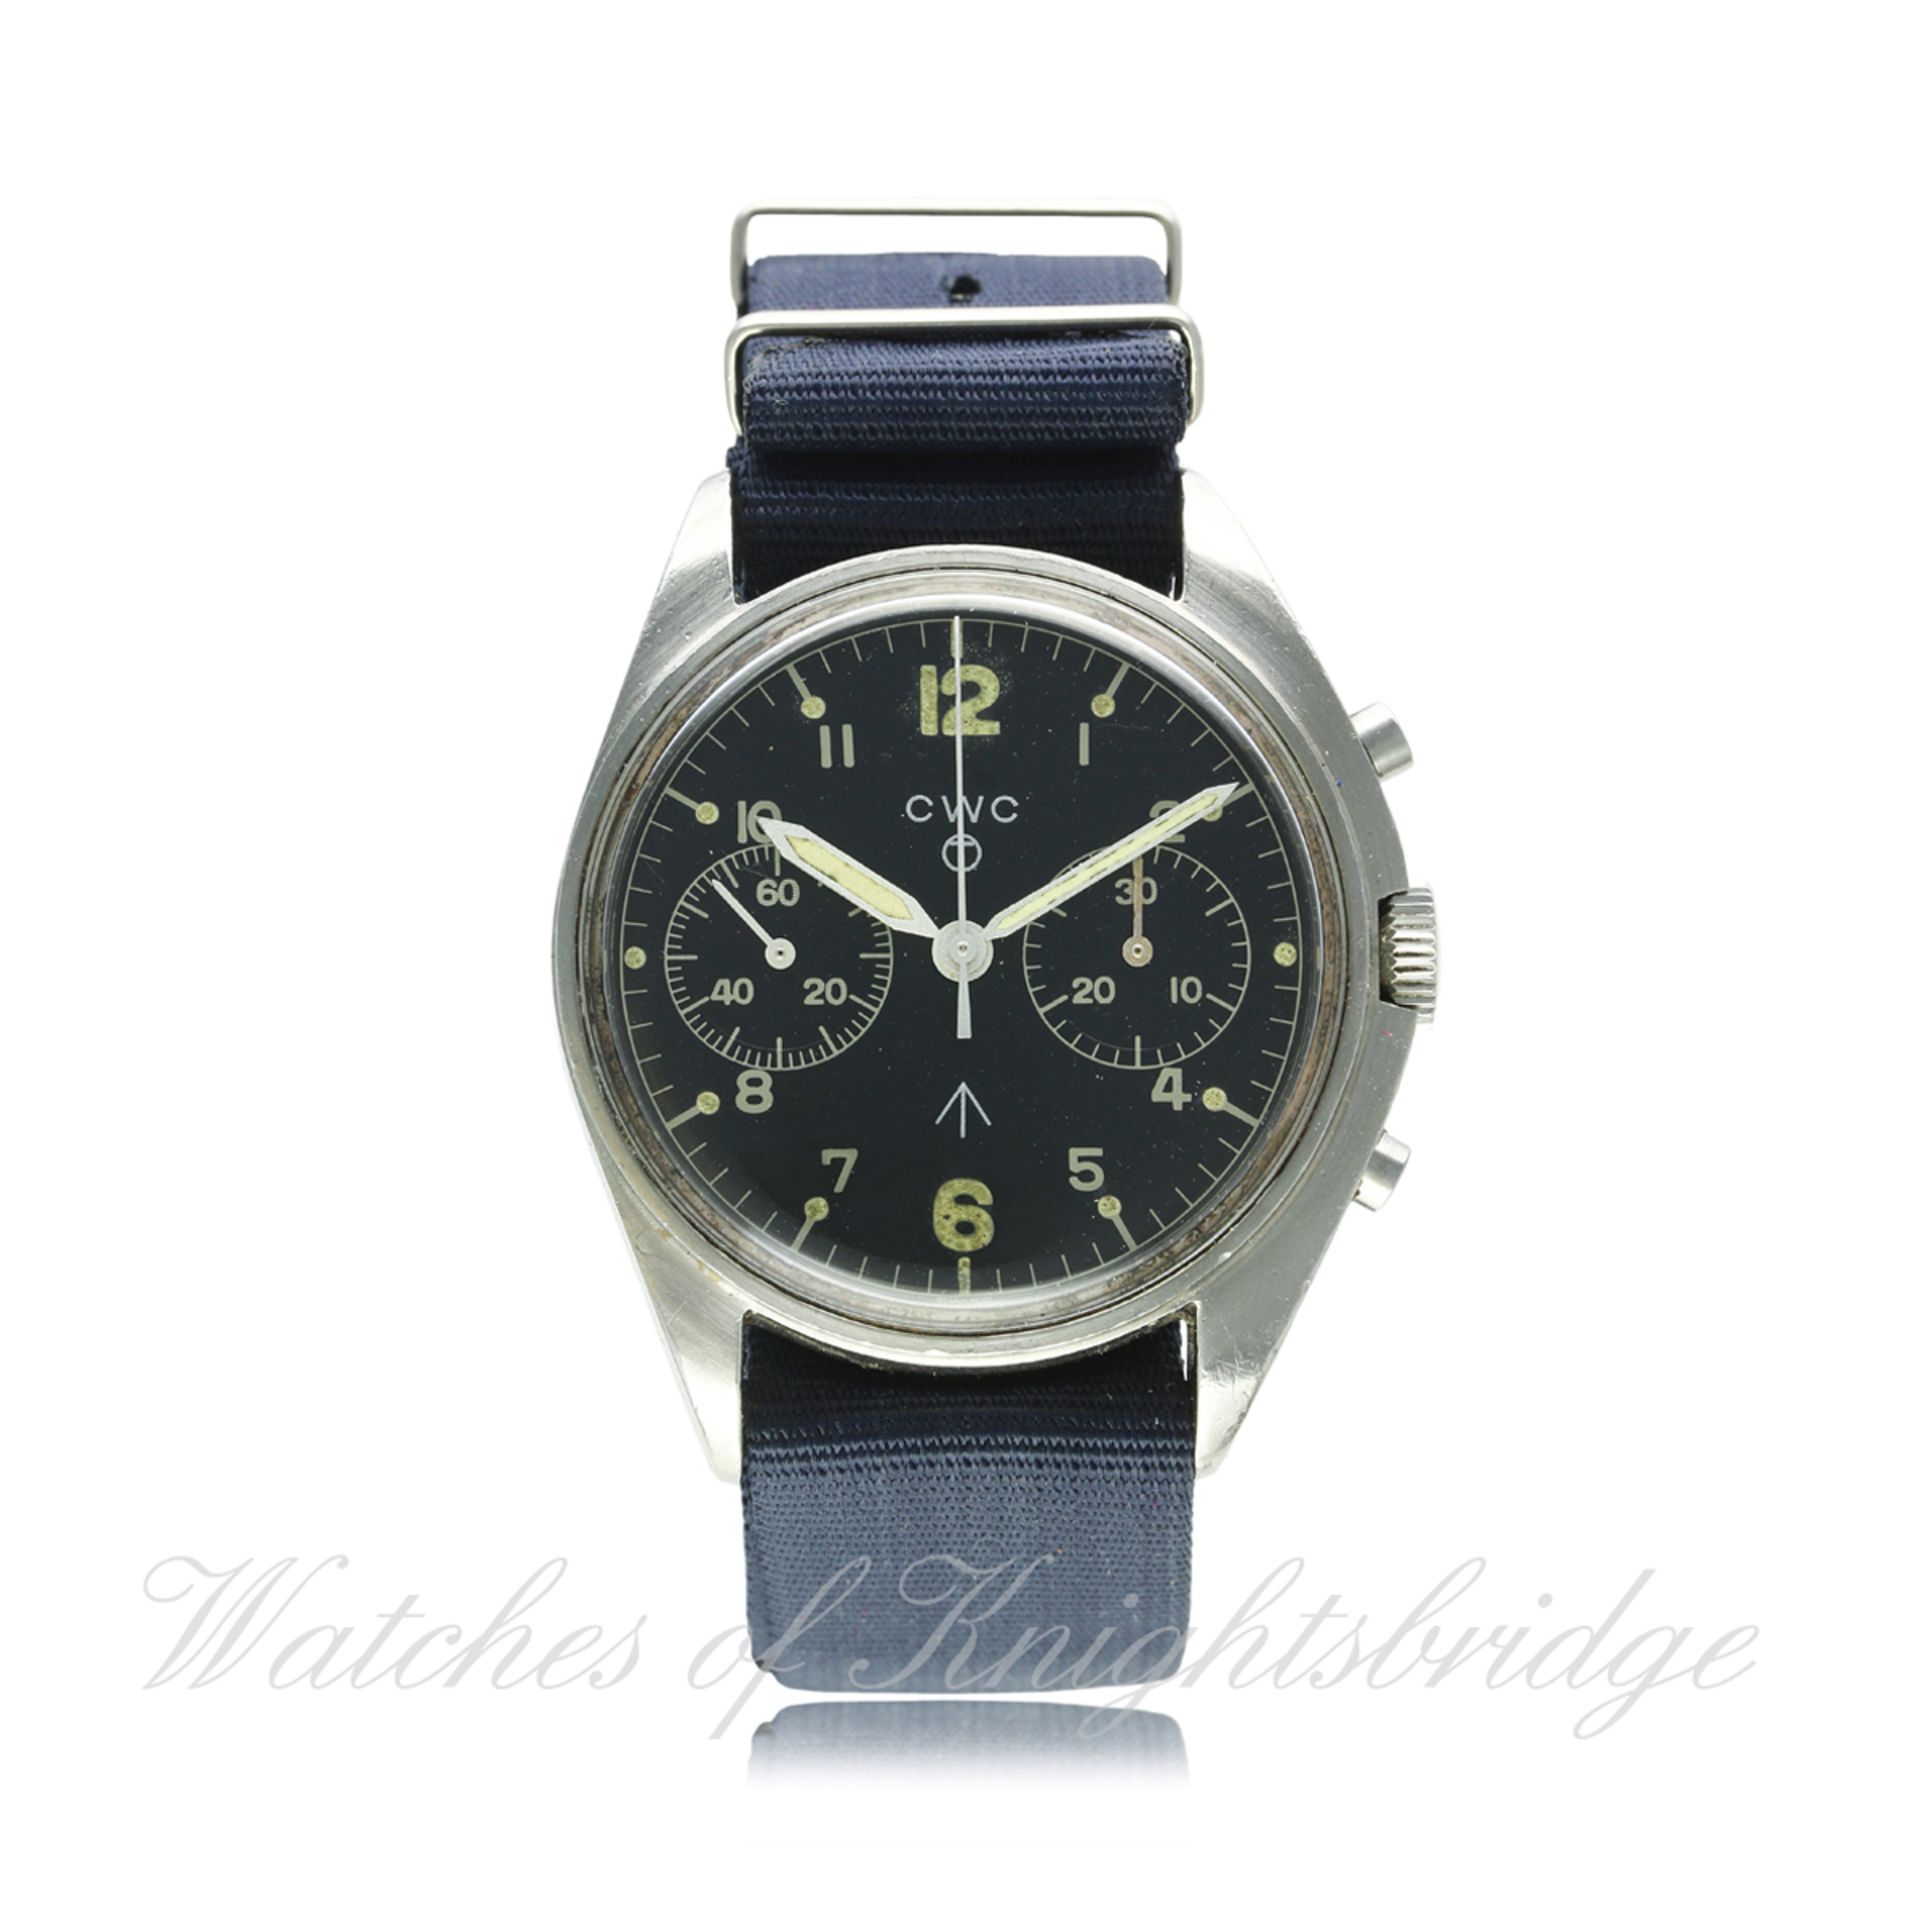 A GENTLEMAN'S STAINLESS STEEL BRITISH MILITARY RAF CWC CHRONOGRAPH PILOTS WRIST WATCH DATED 1980